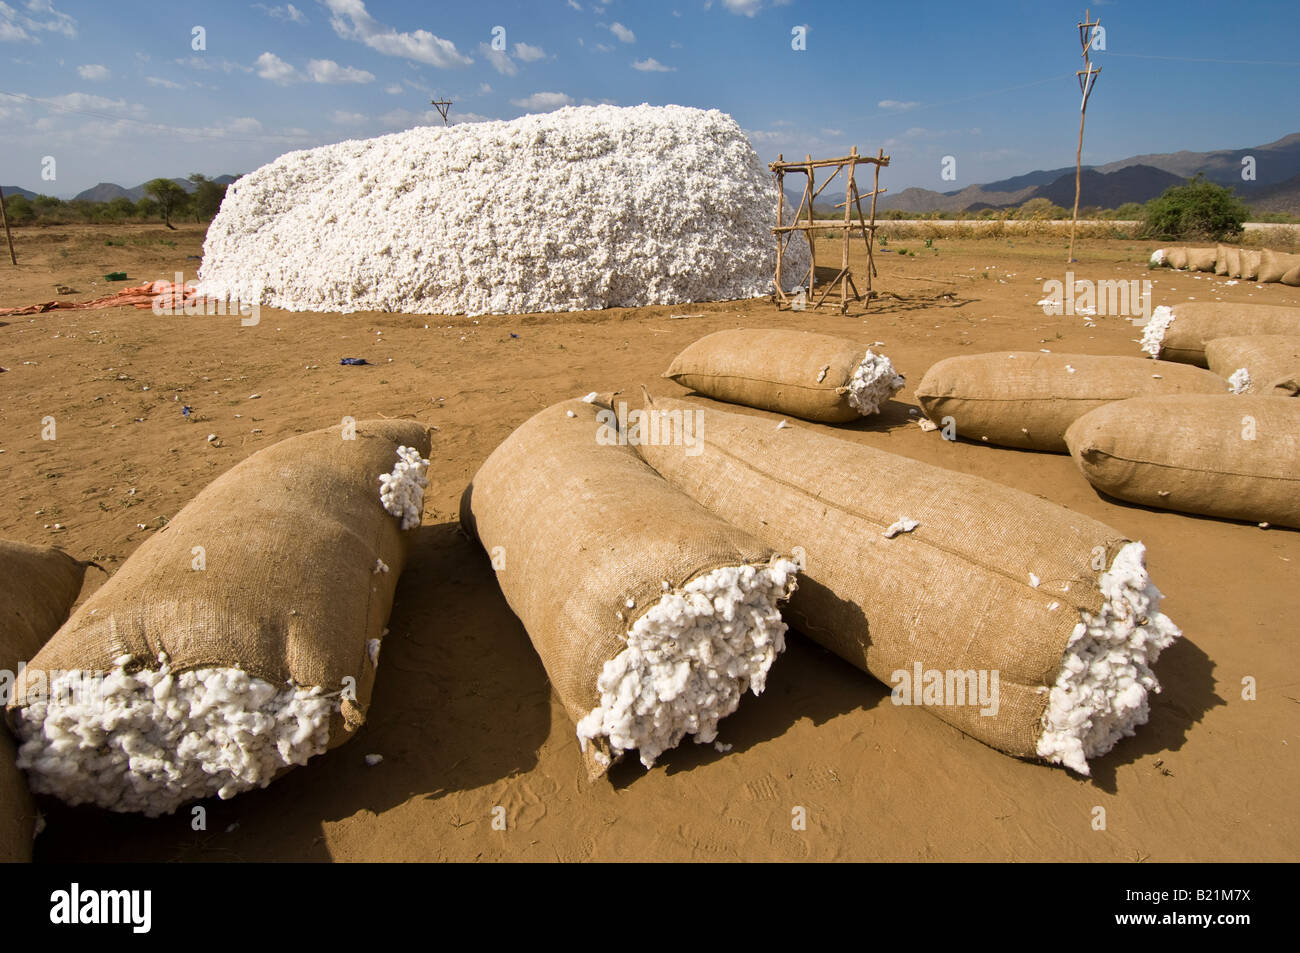 Cotton being prepared to be commercialized, Ethiopia. Stock Photo